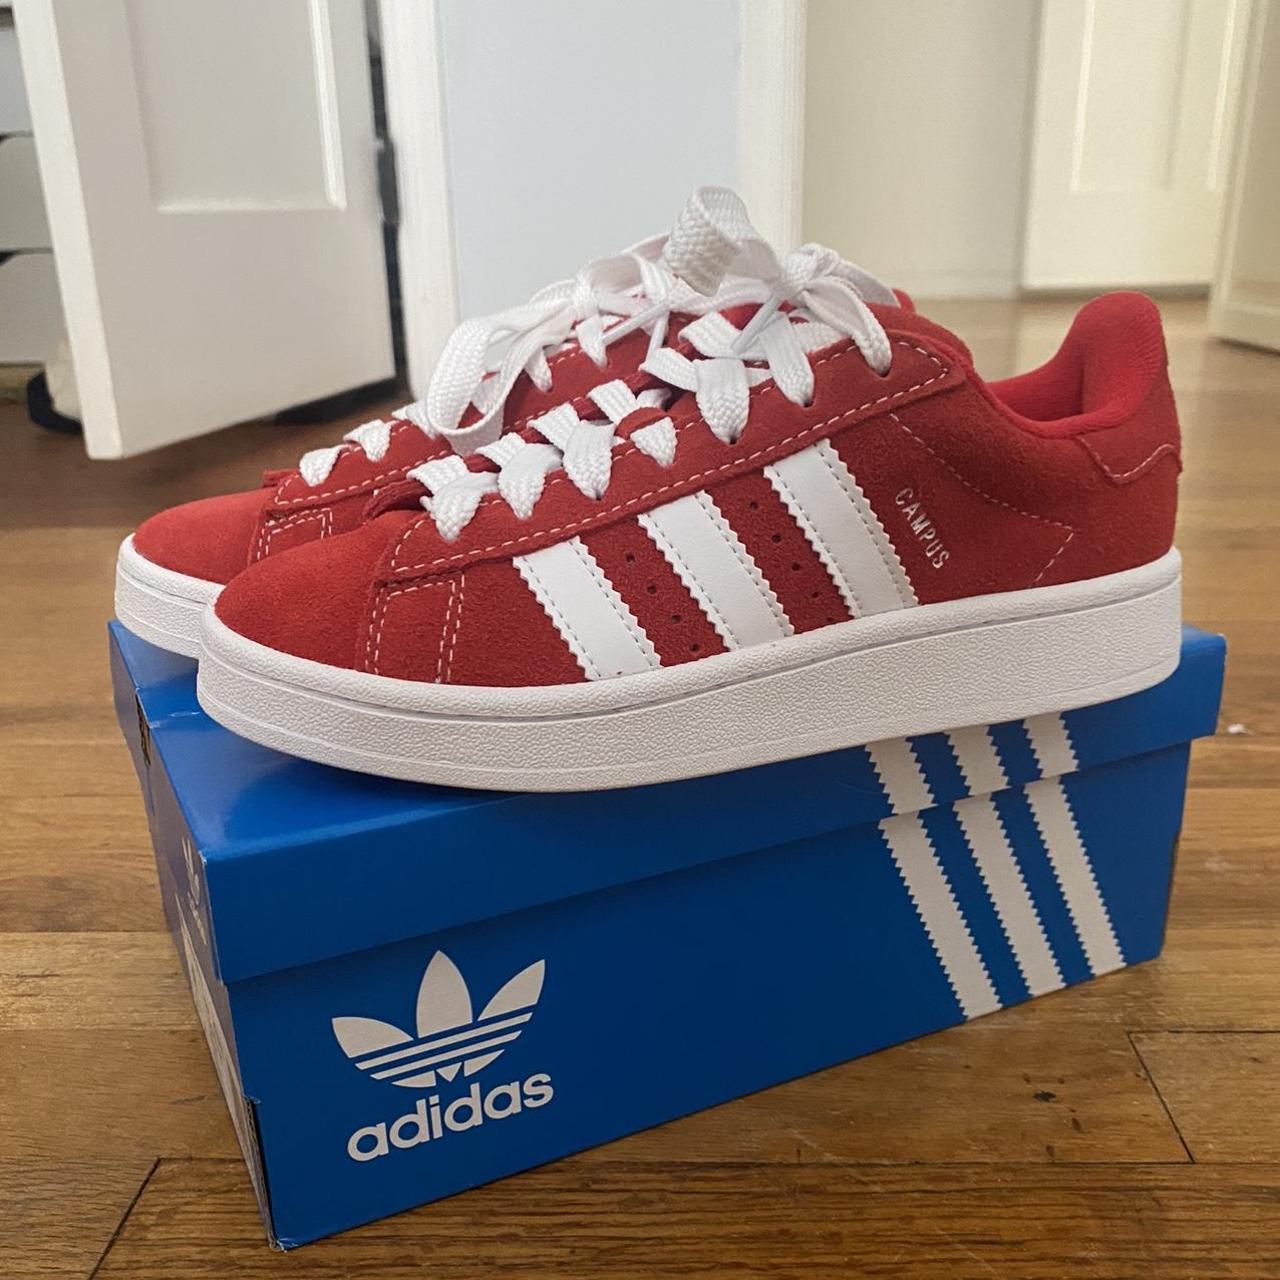 Adidas Women's Red Trainers | Depop